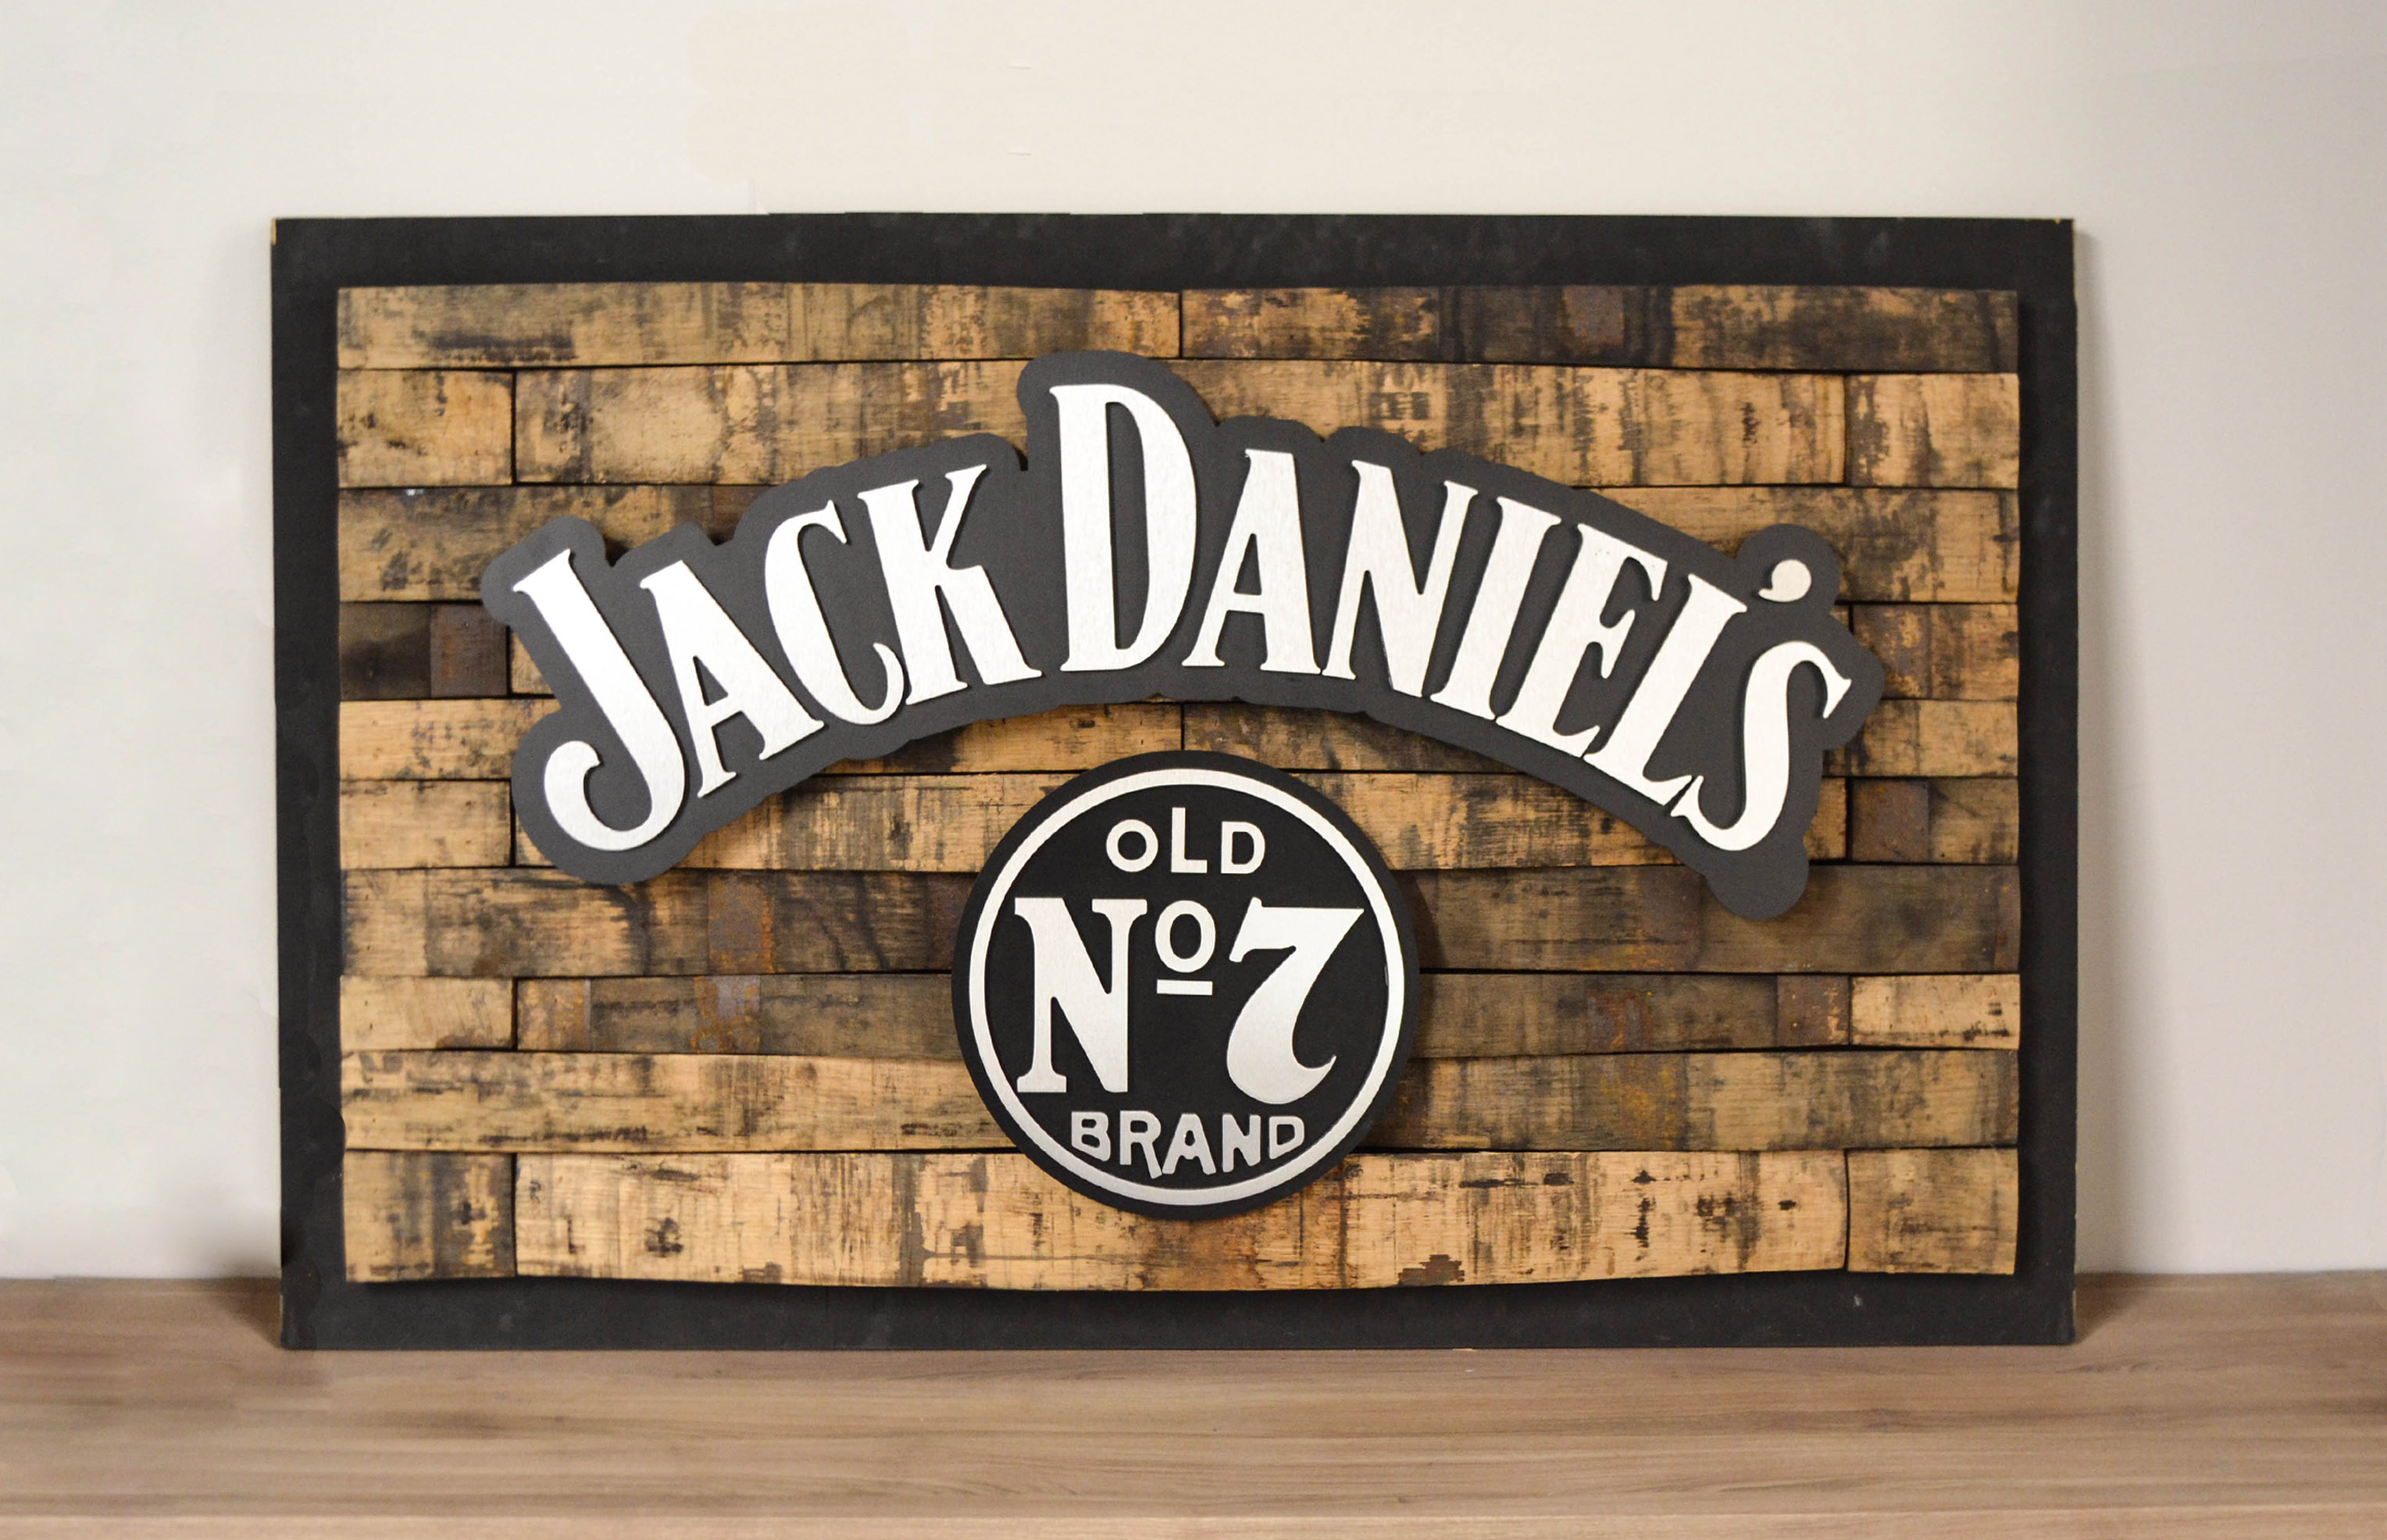 Jack Daniel’s Tennessee Whiskey